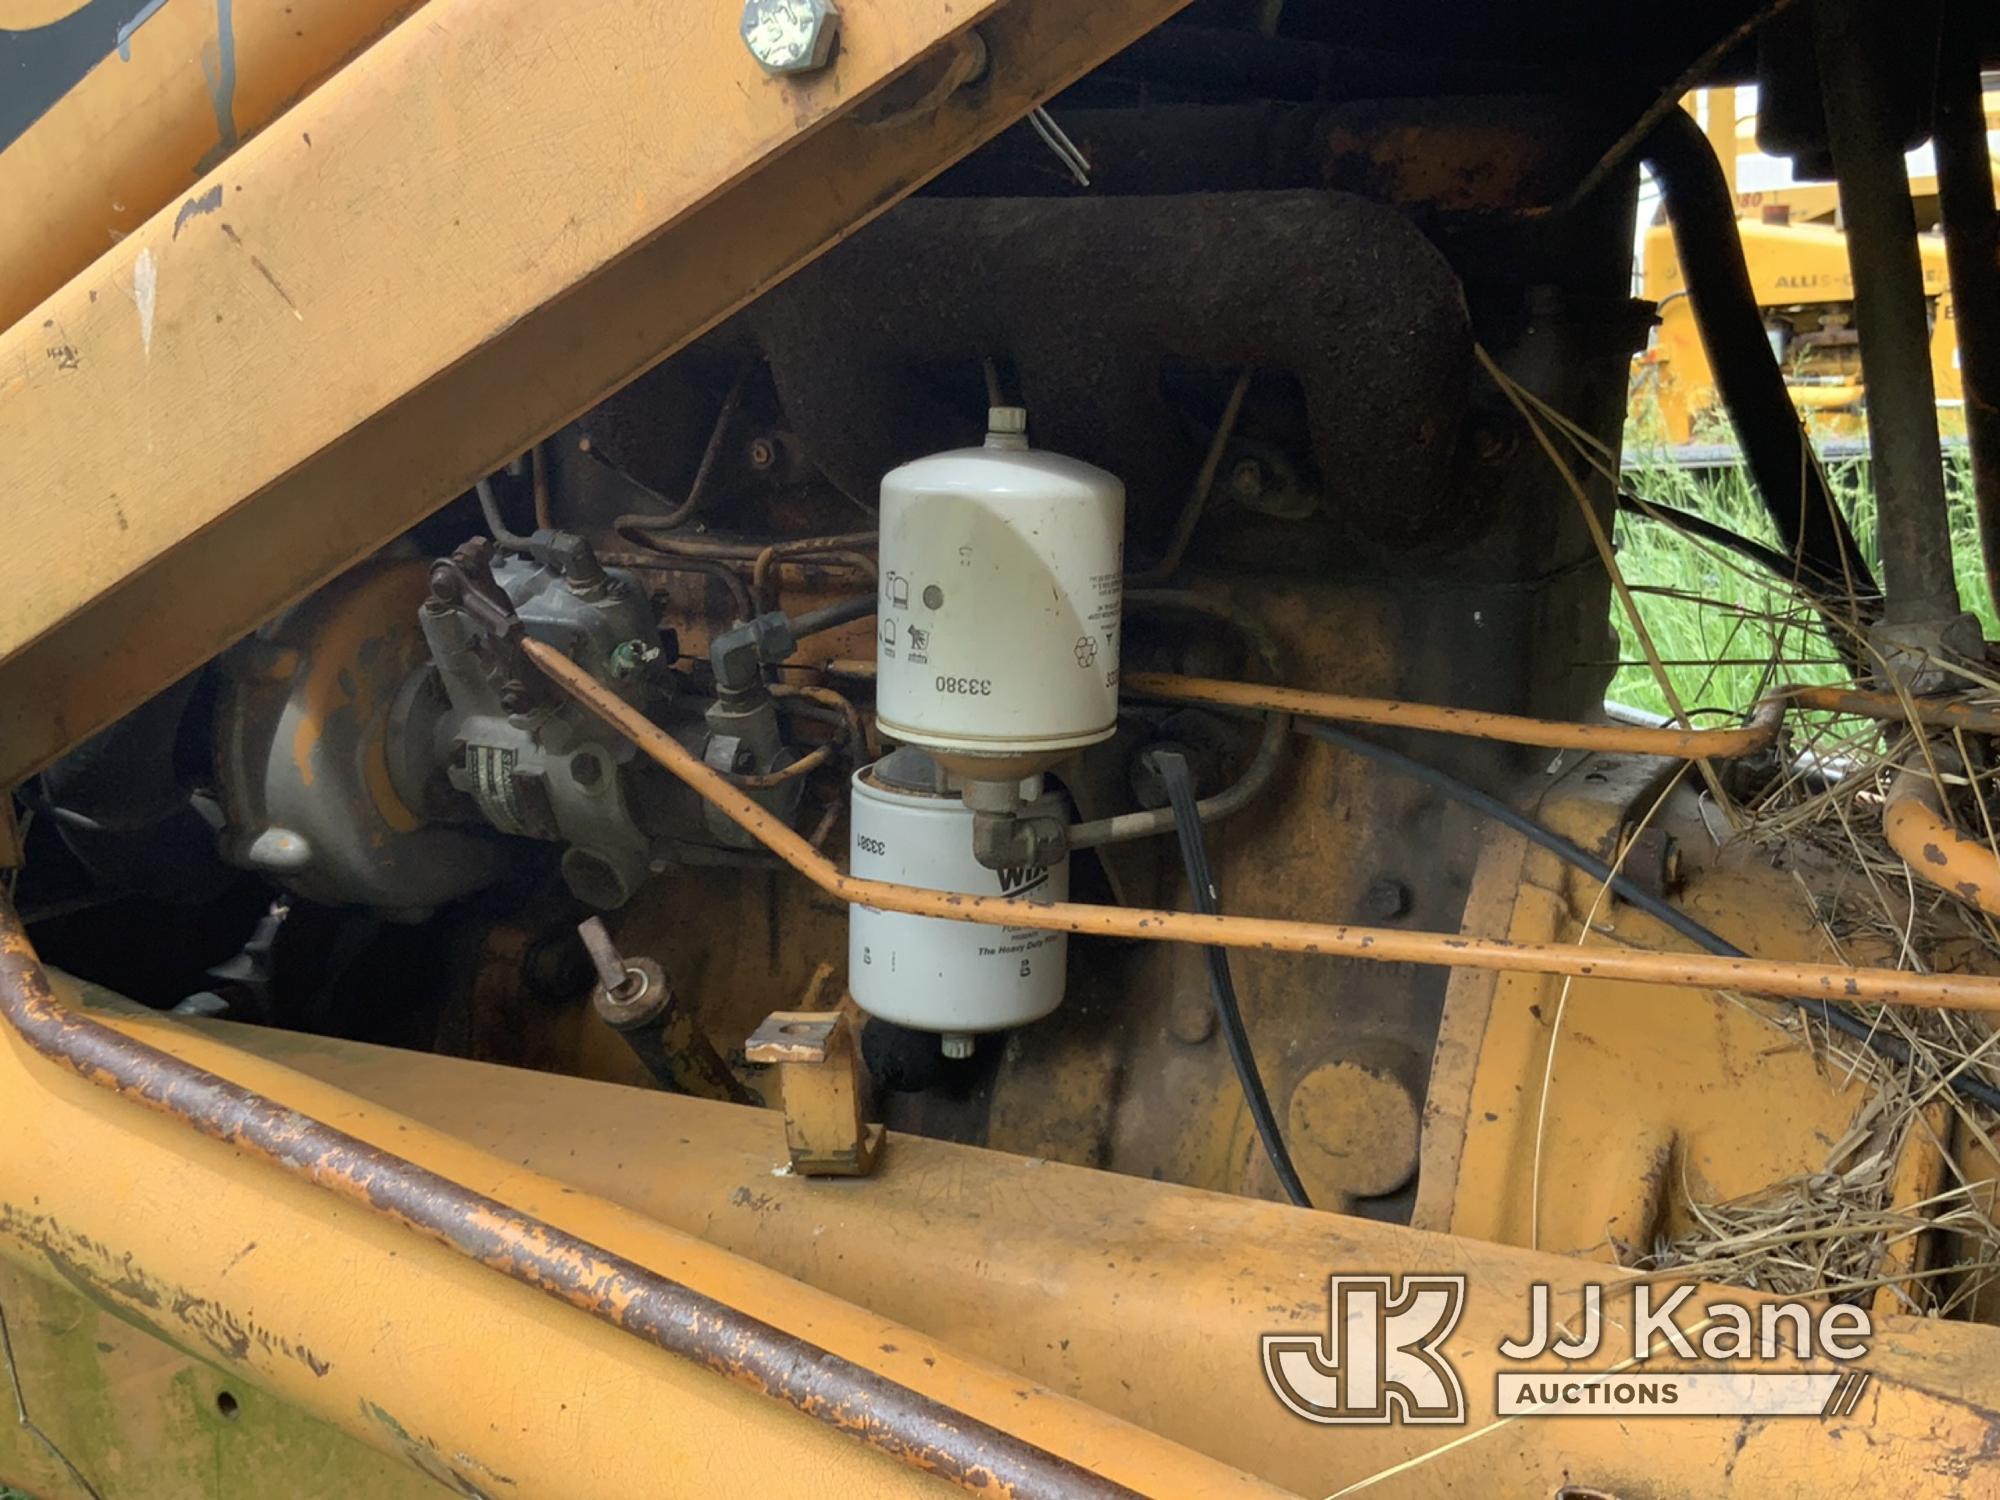 (Capaldo, KS) Case 580C Tractor Loader Backhoe Not Running, Condition Unknown. Buyer responsible for